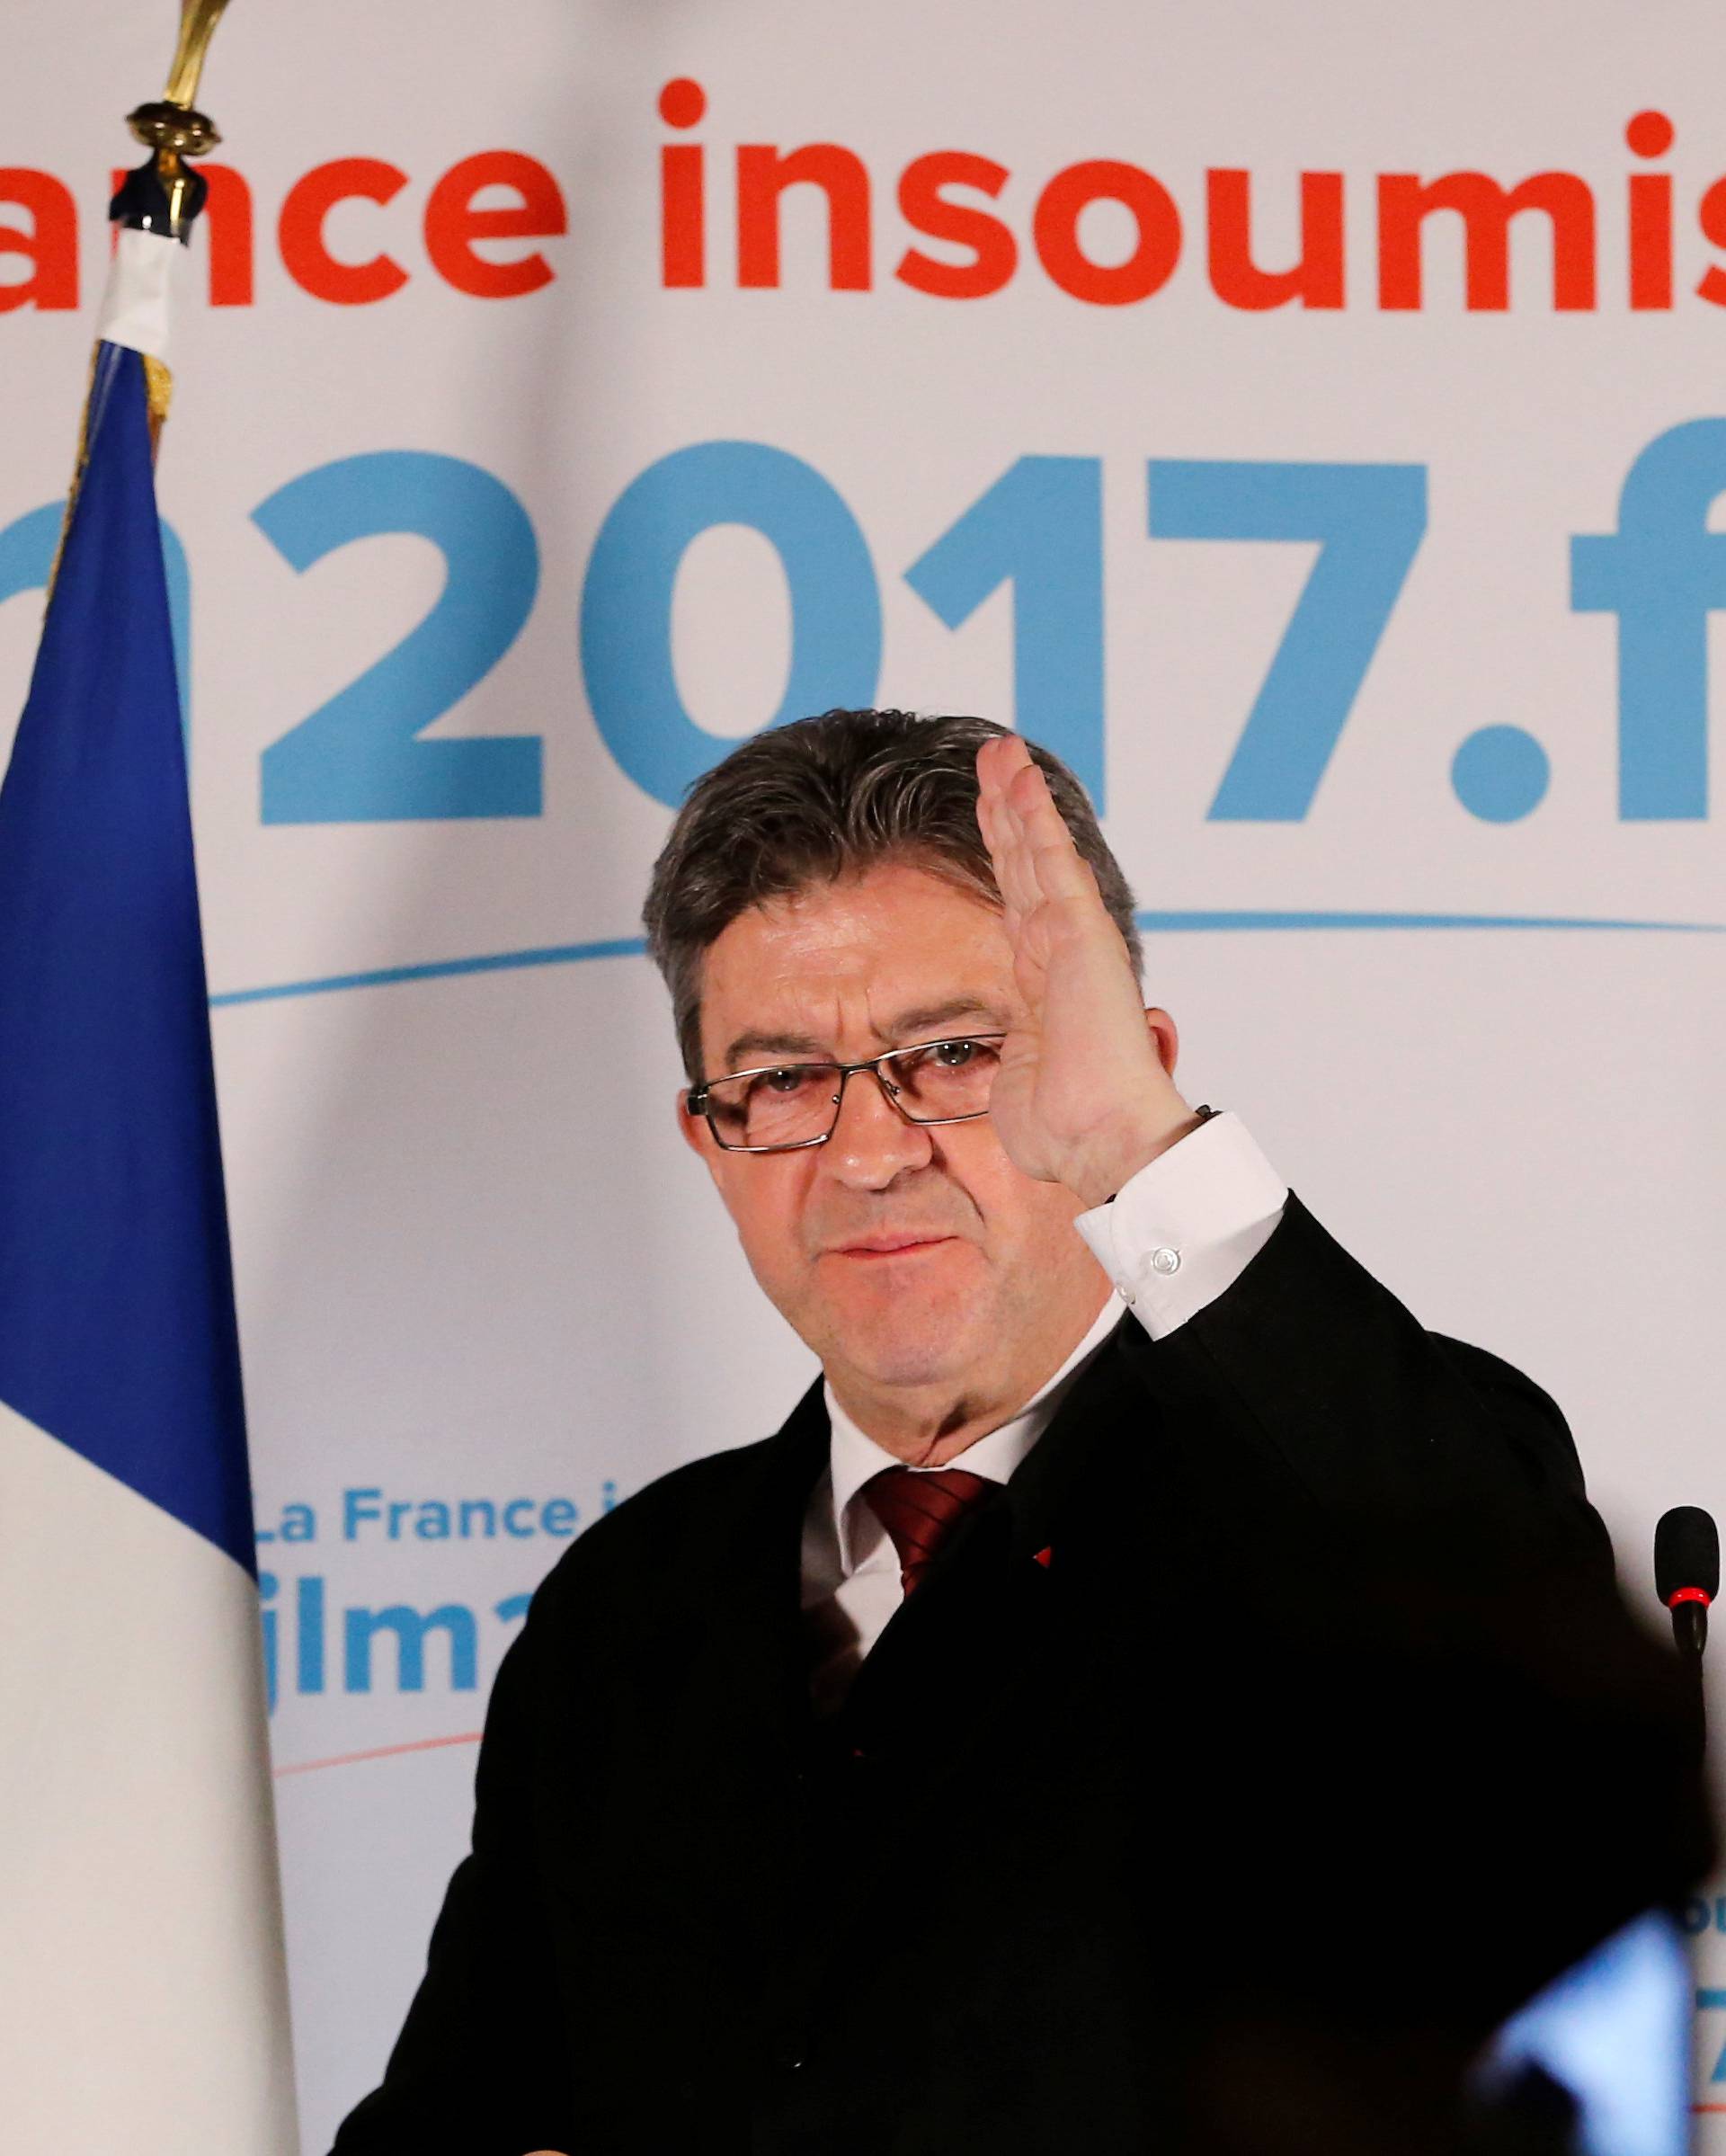 Jean-Luc Melenchon, candidate of the French far-left Parti de Gauche and candidate for the French 2017 presidential election, delivers a speech in a bar in Paris after early results in the first round of 2017 French presidential election